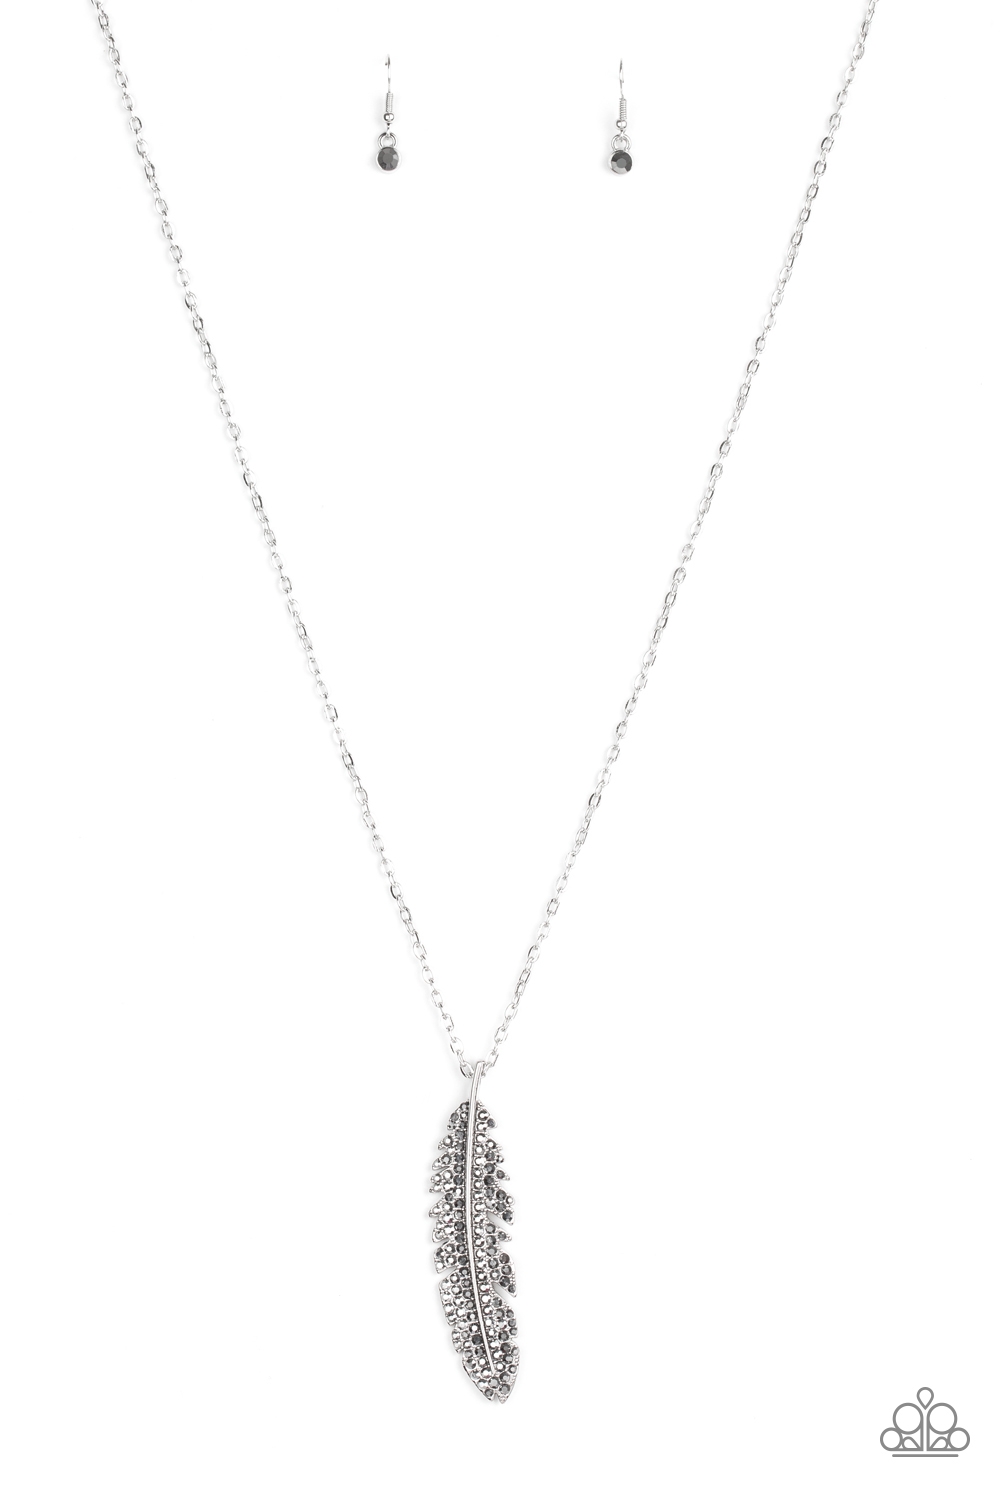 Necklace - Soaring High - Silver